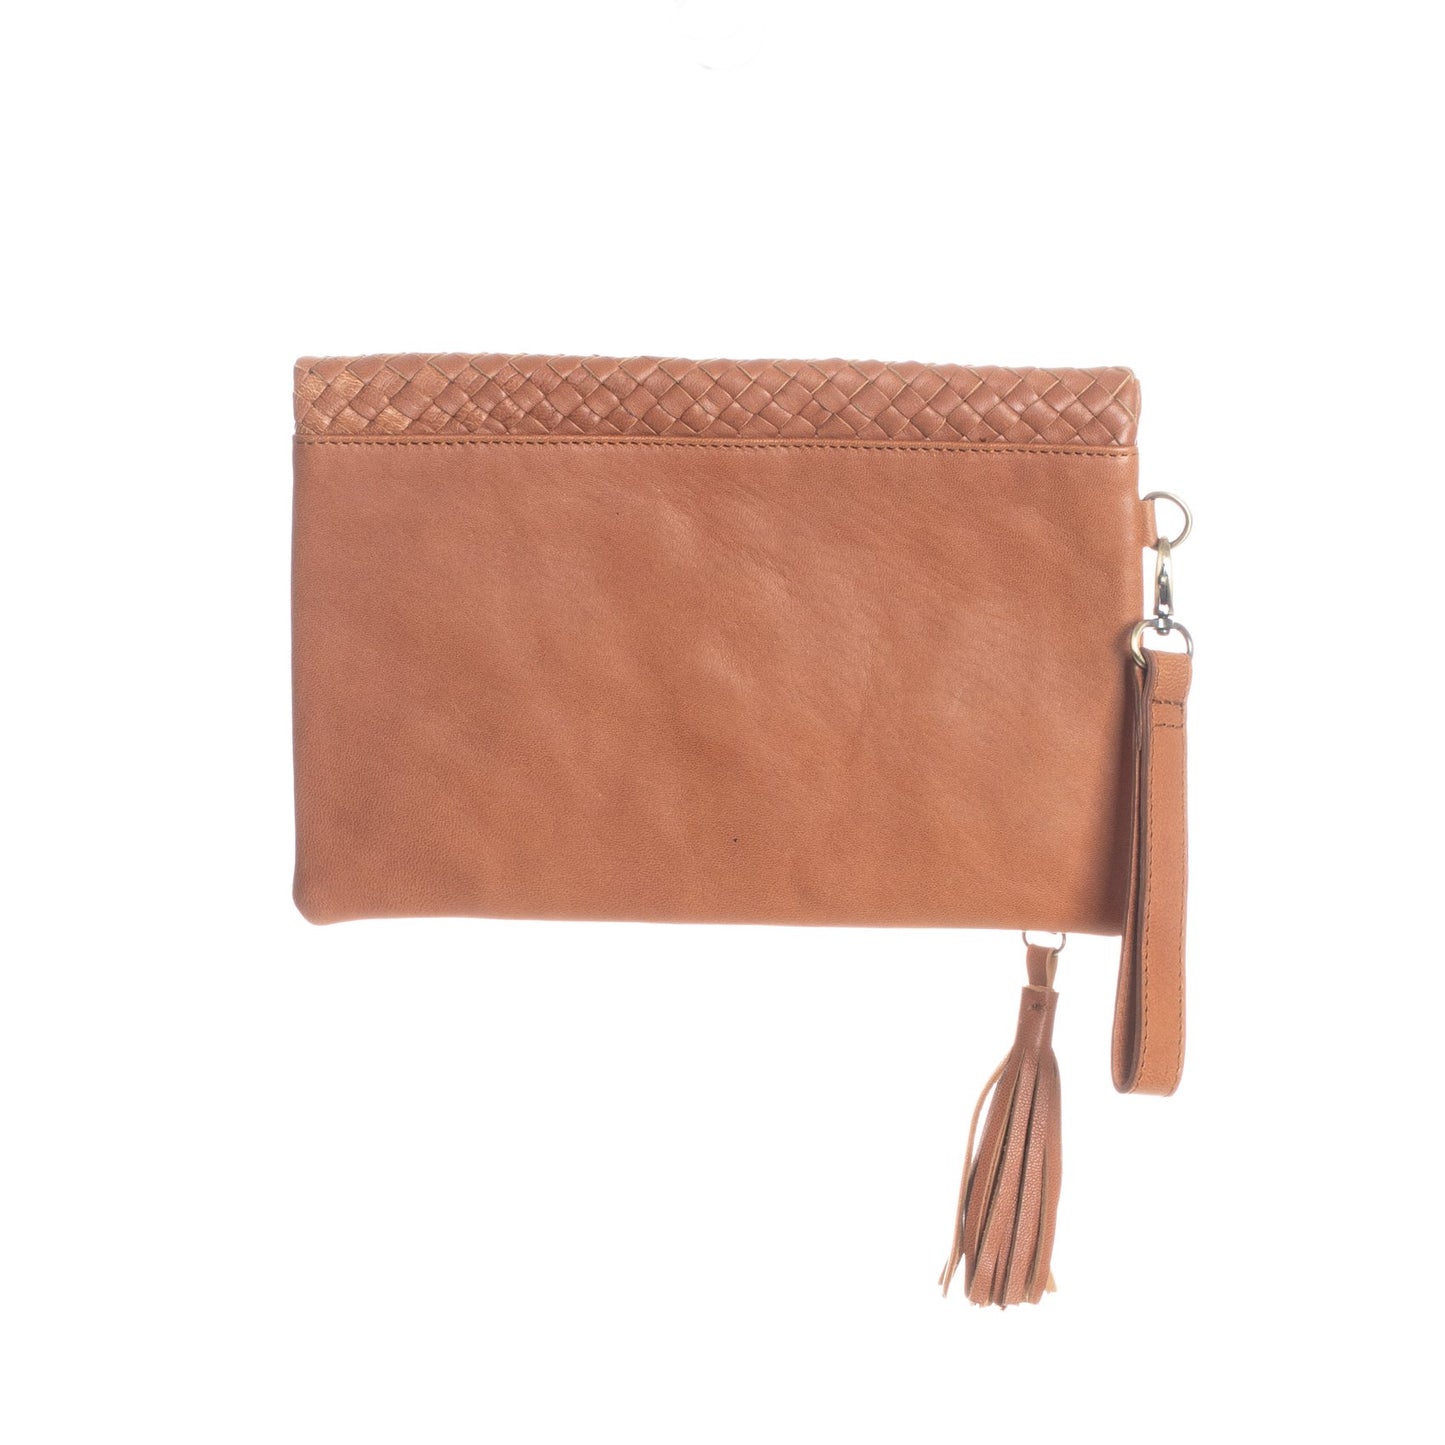 FOLD OVER CLUTCH - MOROCCO WOVEN LEATHER - CAFE